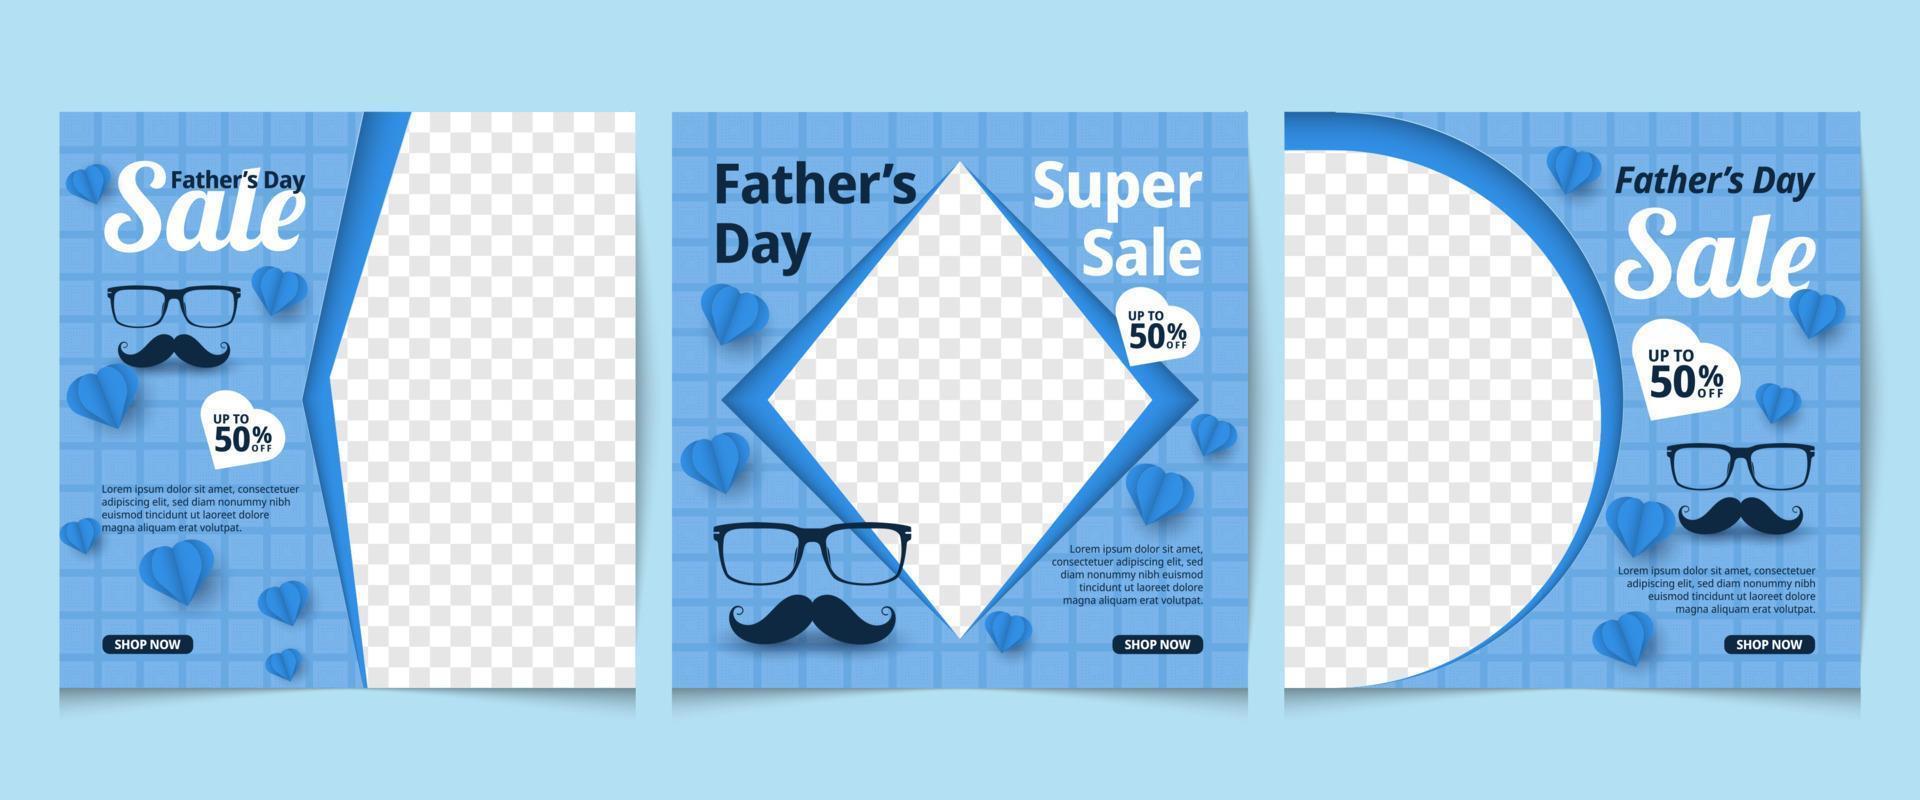 Father's Day Social Media Post Template Designs Set. Square banner in blue color. Can be used for social media, flyers, and websites vector